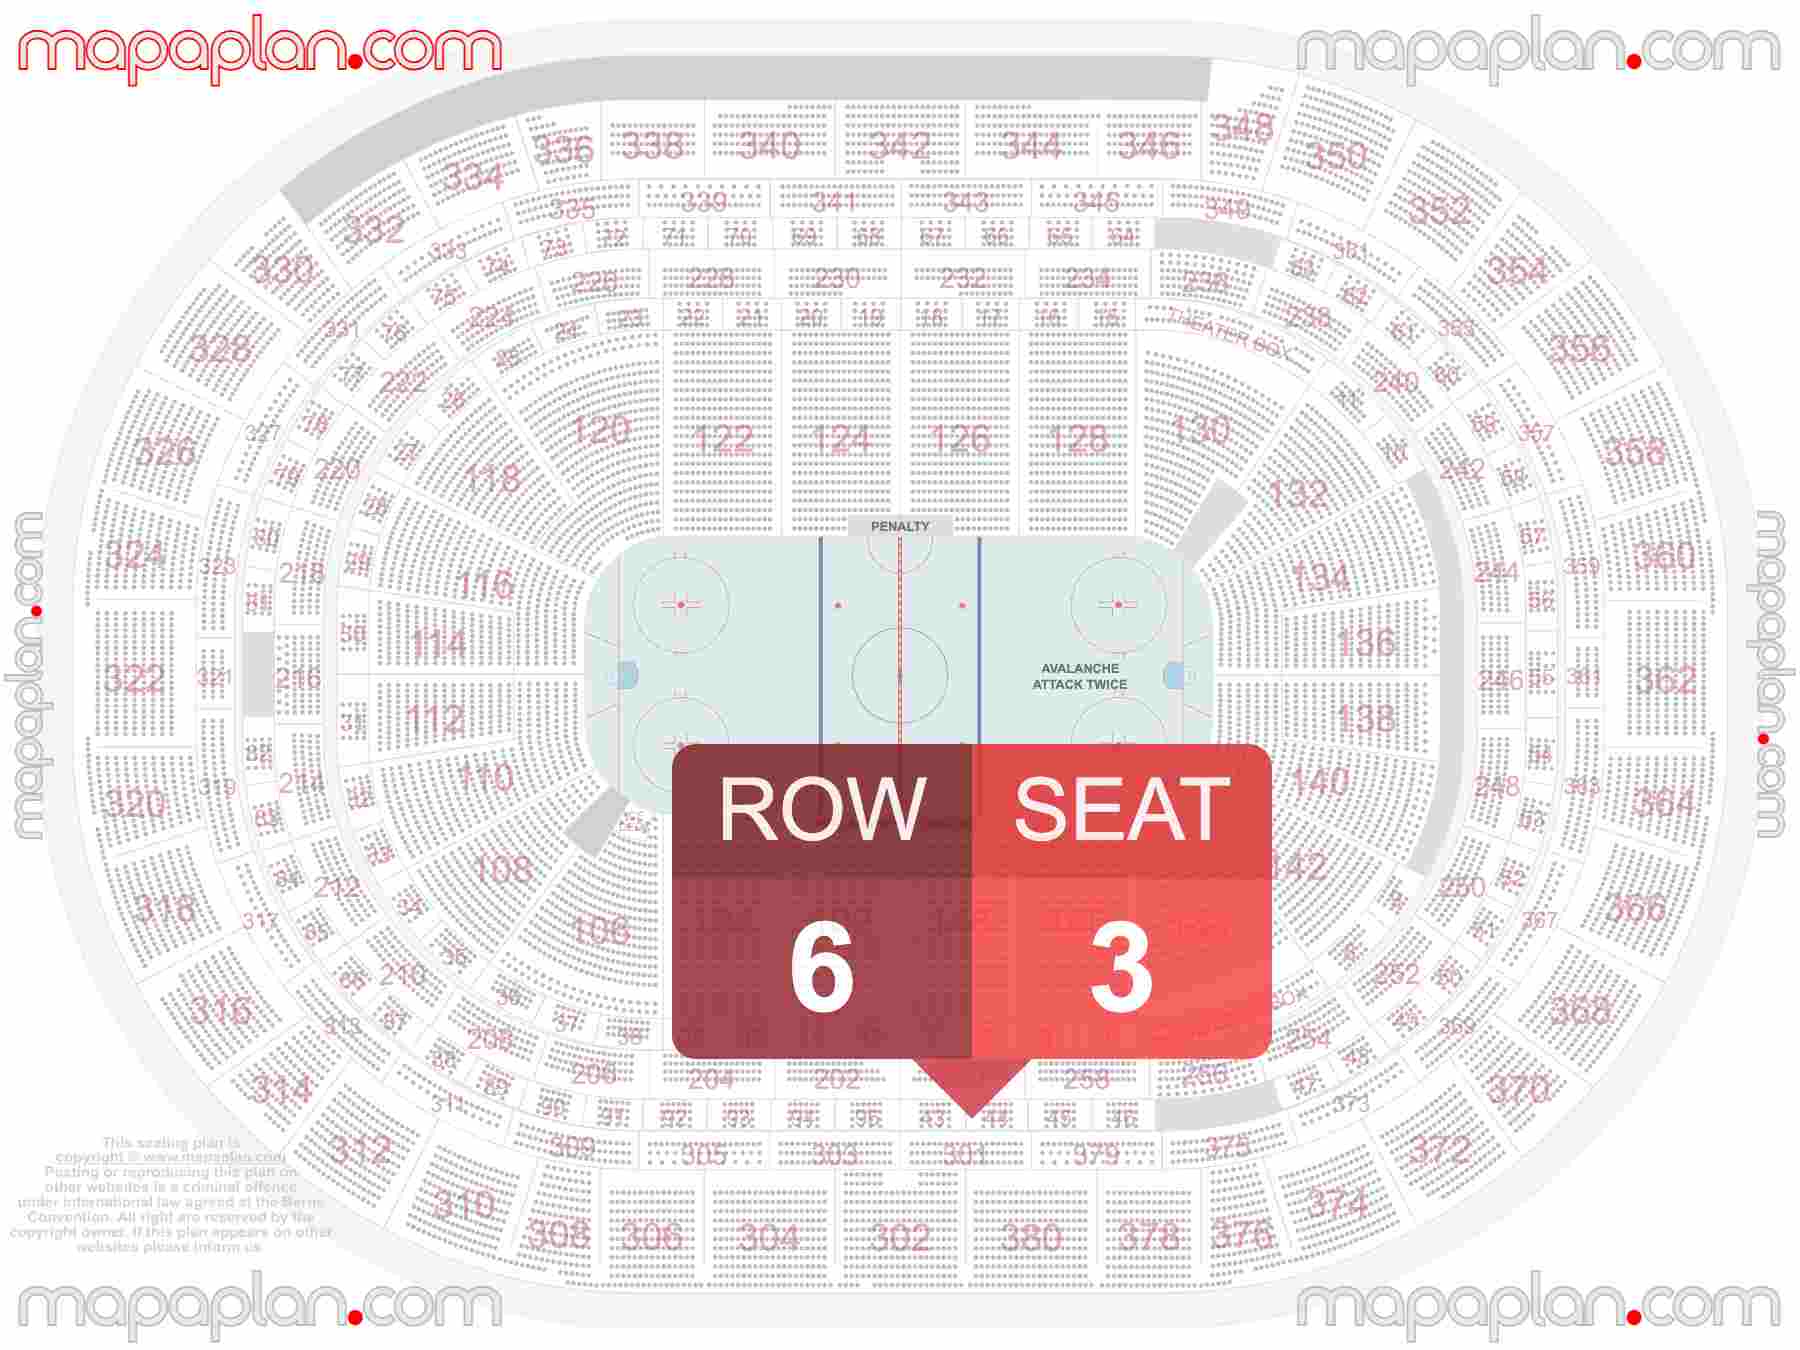 Denver Ball Arena seating chart Colorado Avalanche NHL hockey find best seats row numbering system plan showing how many seats per row - Individual 'find my seat' virtual locator